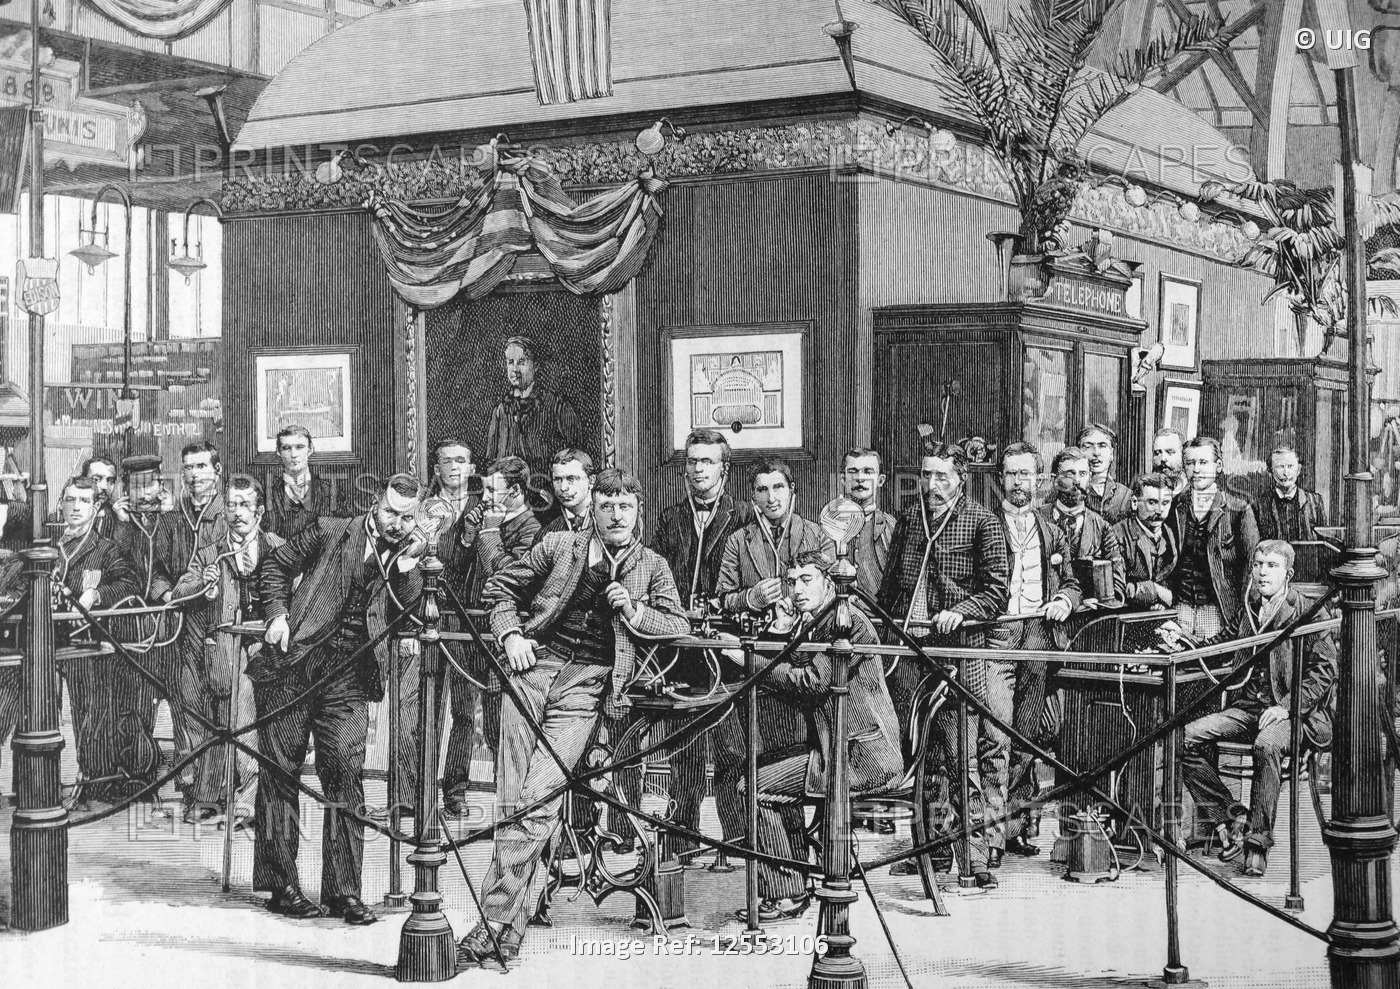 Public demonstration of Edison's phonograph at the Paris International Exposition of 1889